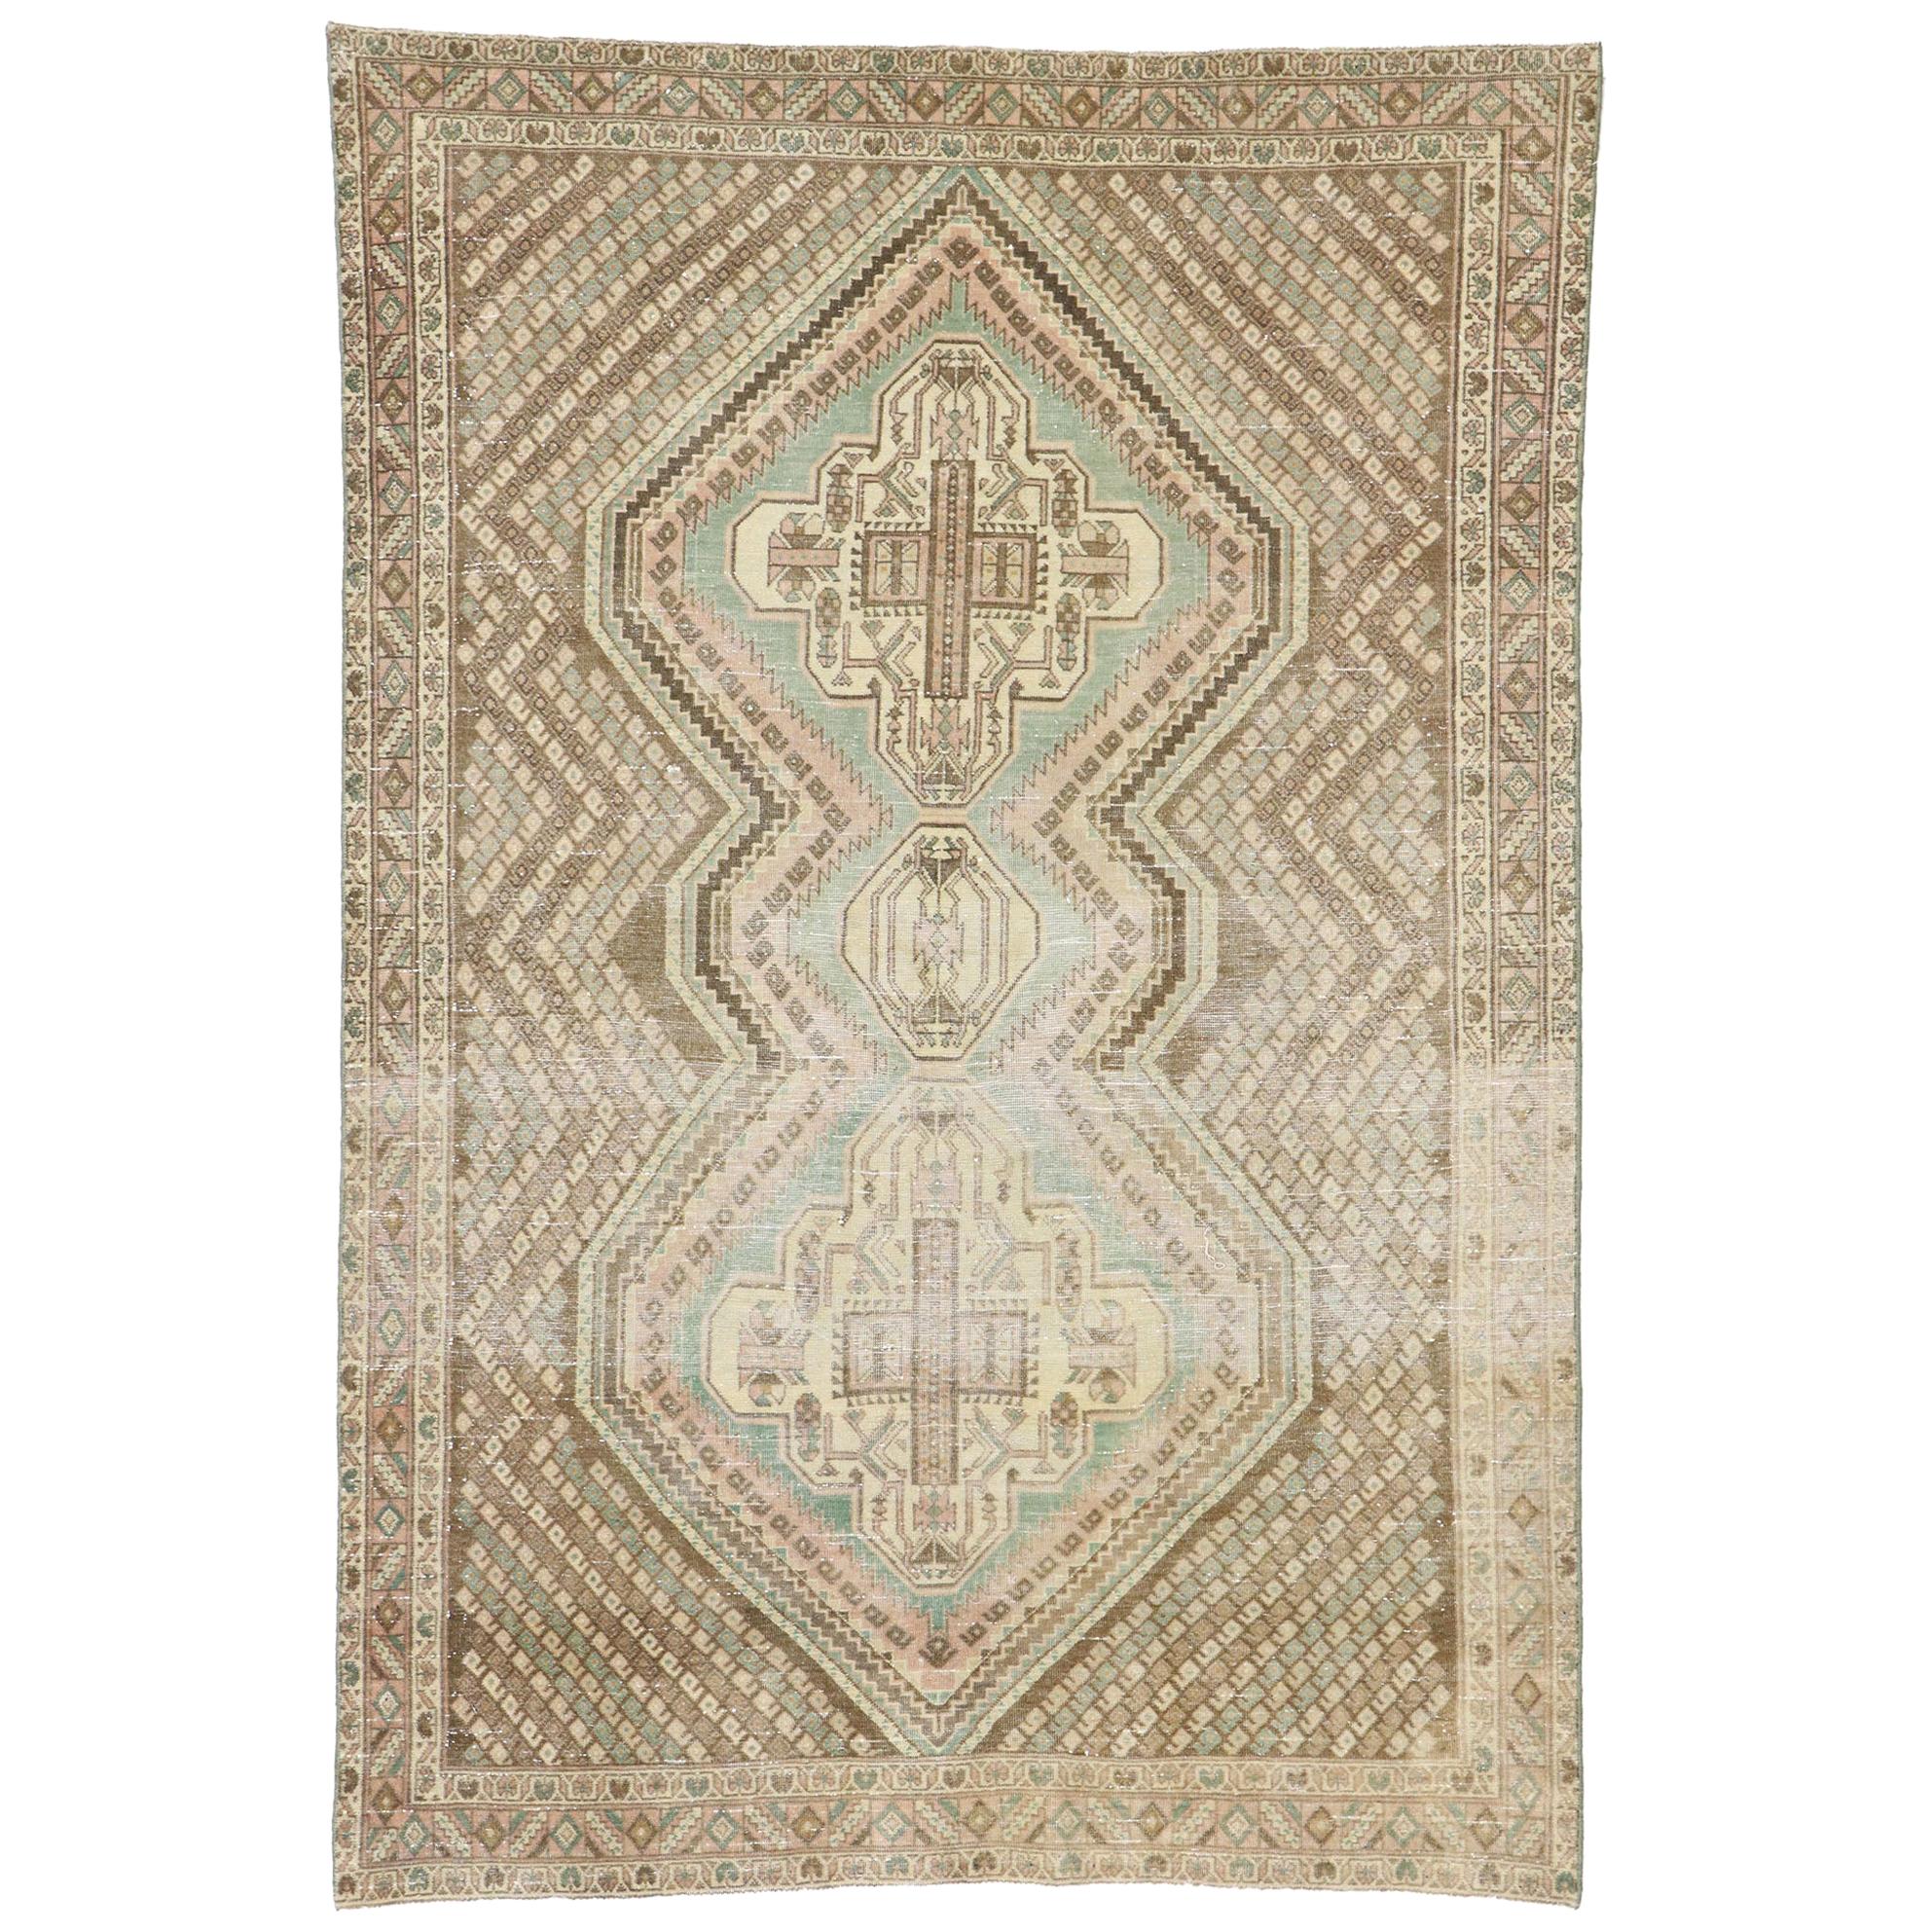 Distressed Antique Persian Afshar Tribal Rug with Boteh Design